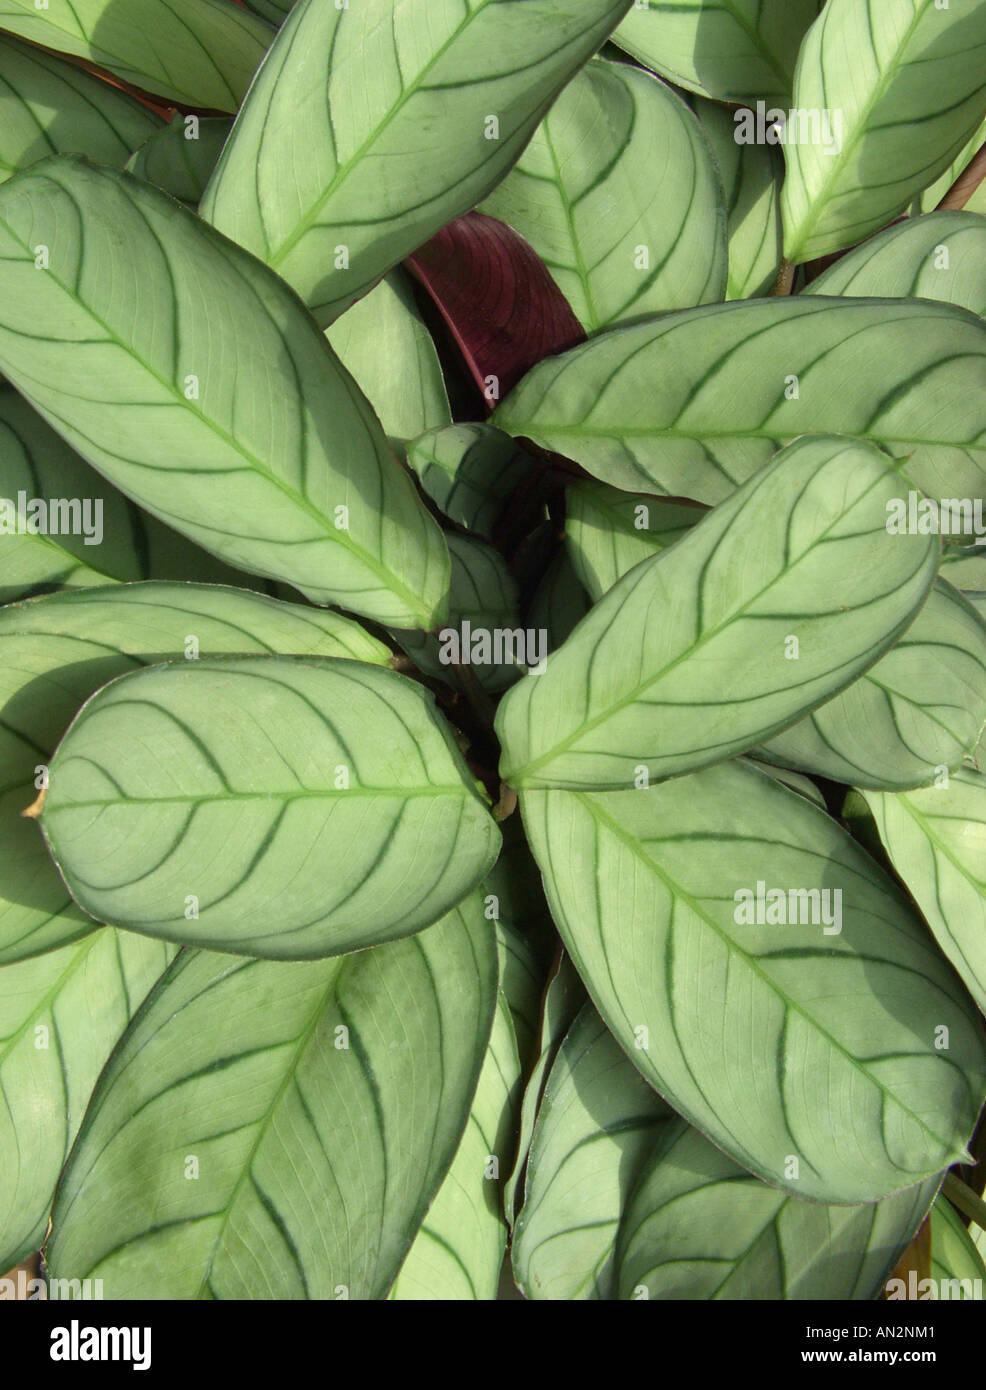 Ctenanthe oppenheimiana (Ctenanthe oppenheimiana), leaves Stock Photo